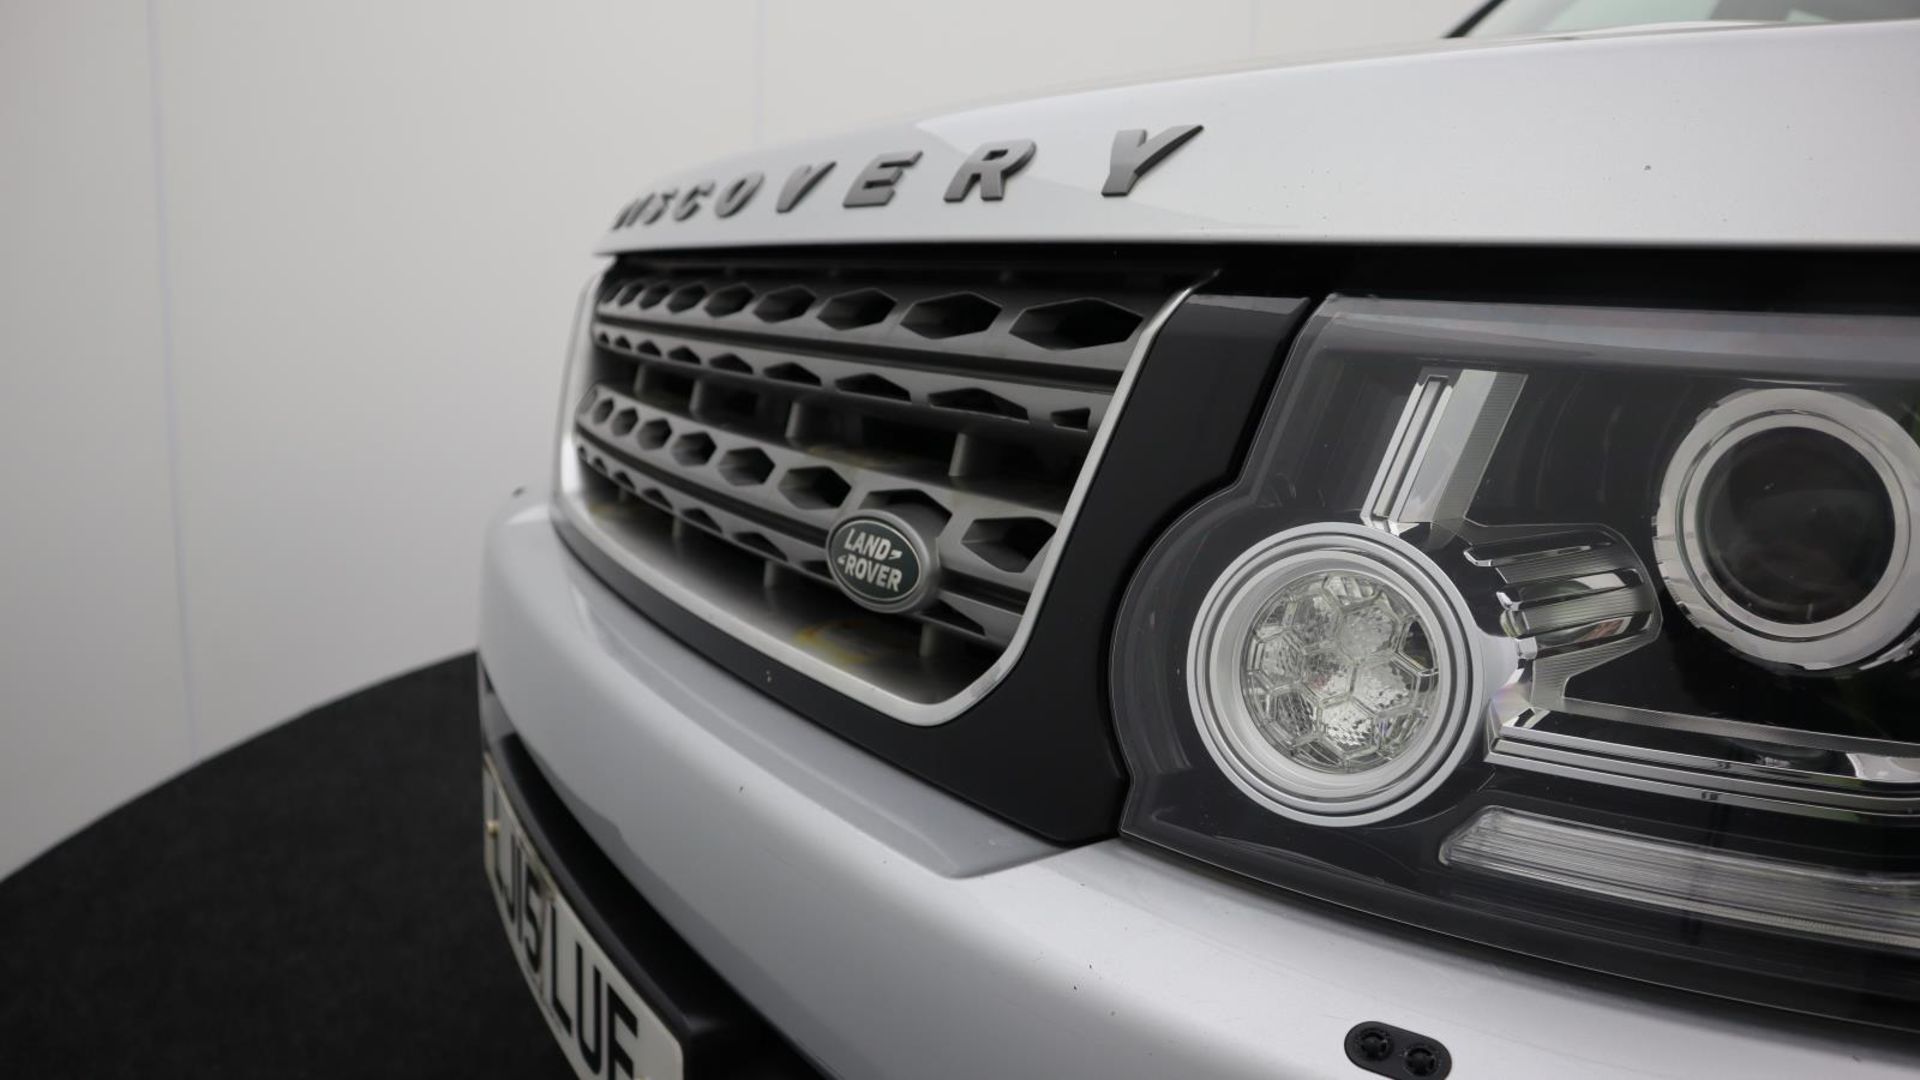 Land Rover Discovery SDV6 SE - 2015 - Automatic - Diesel - 2993cc 6 Cylinder engine - LJ15 LUF - Image 36 of 42